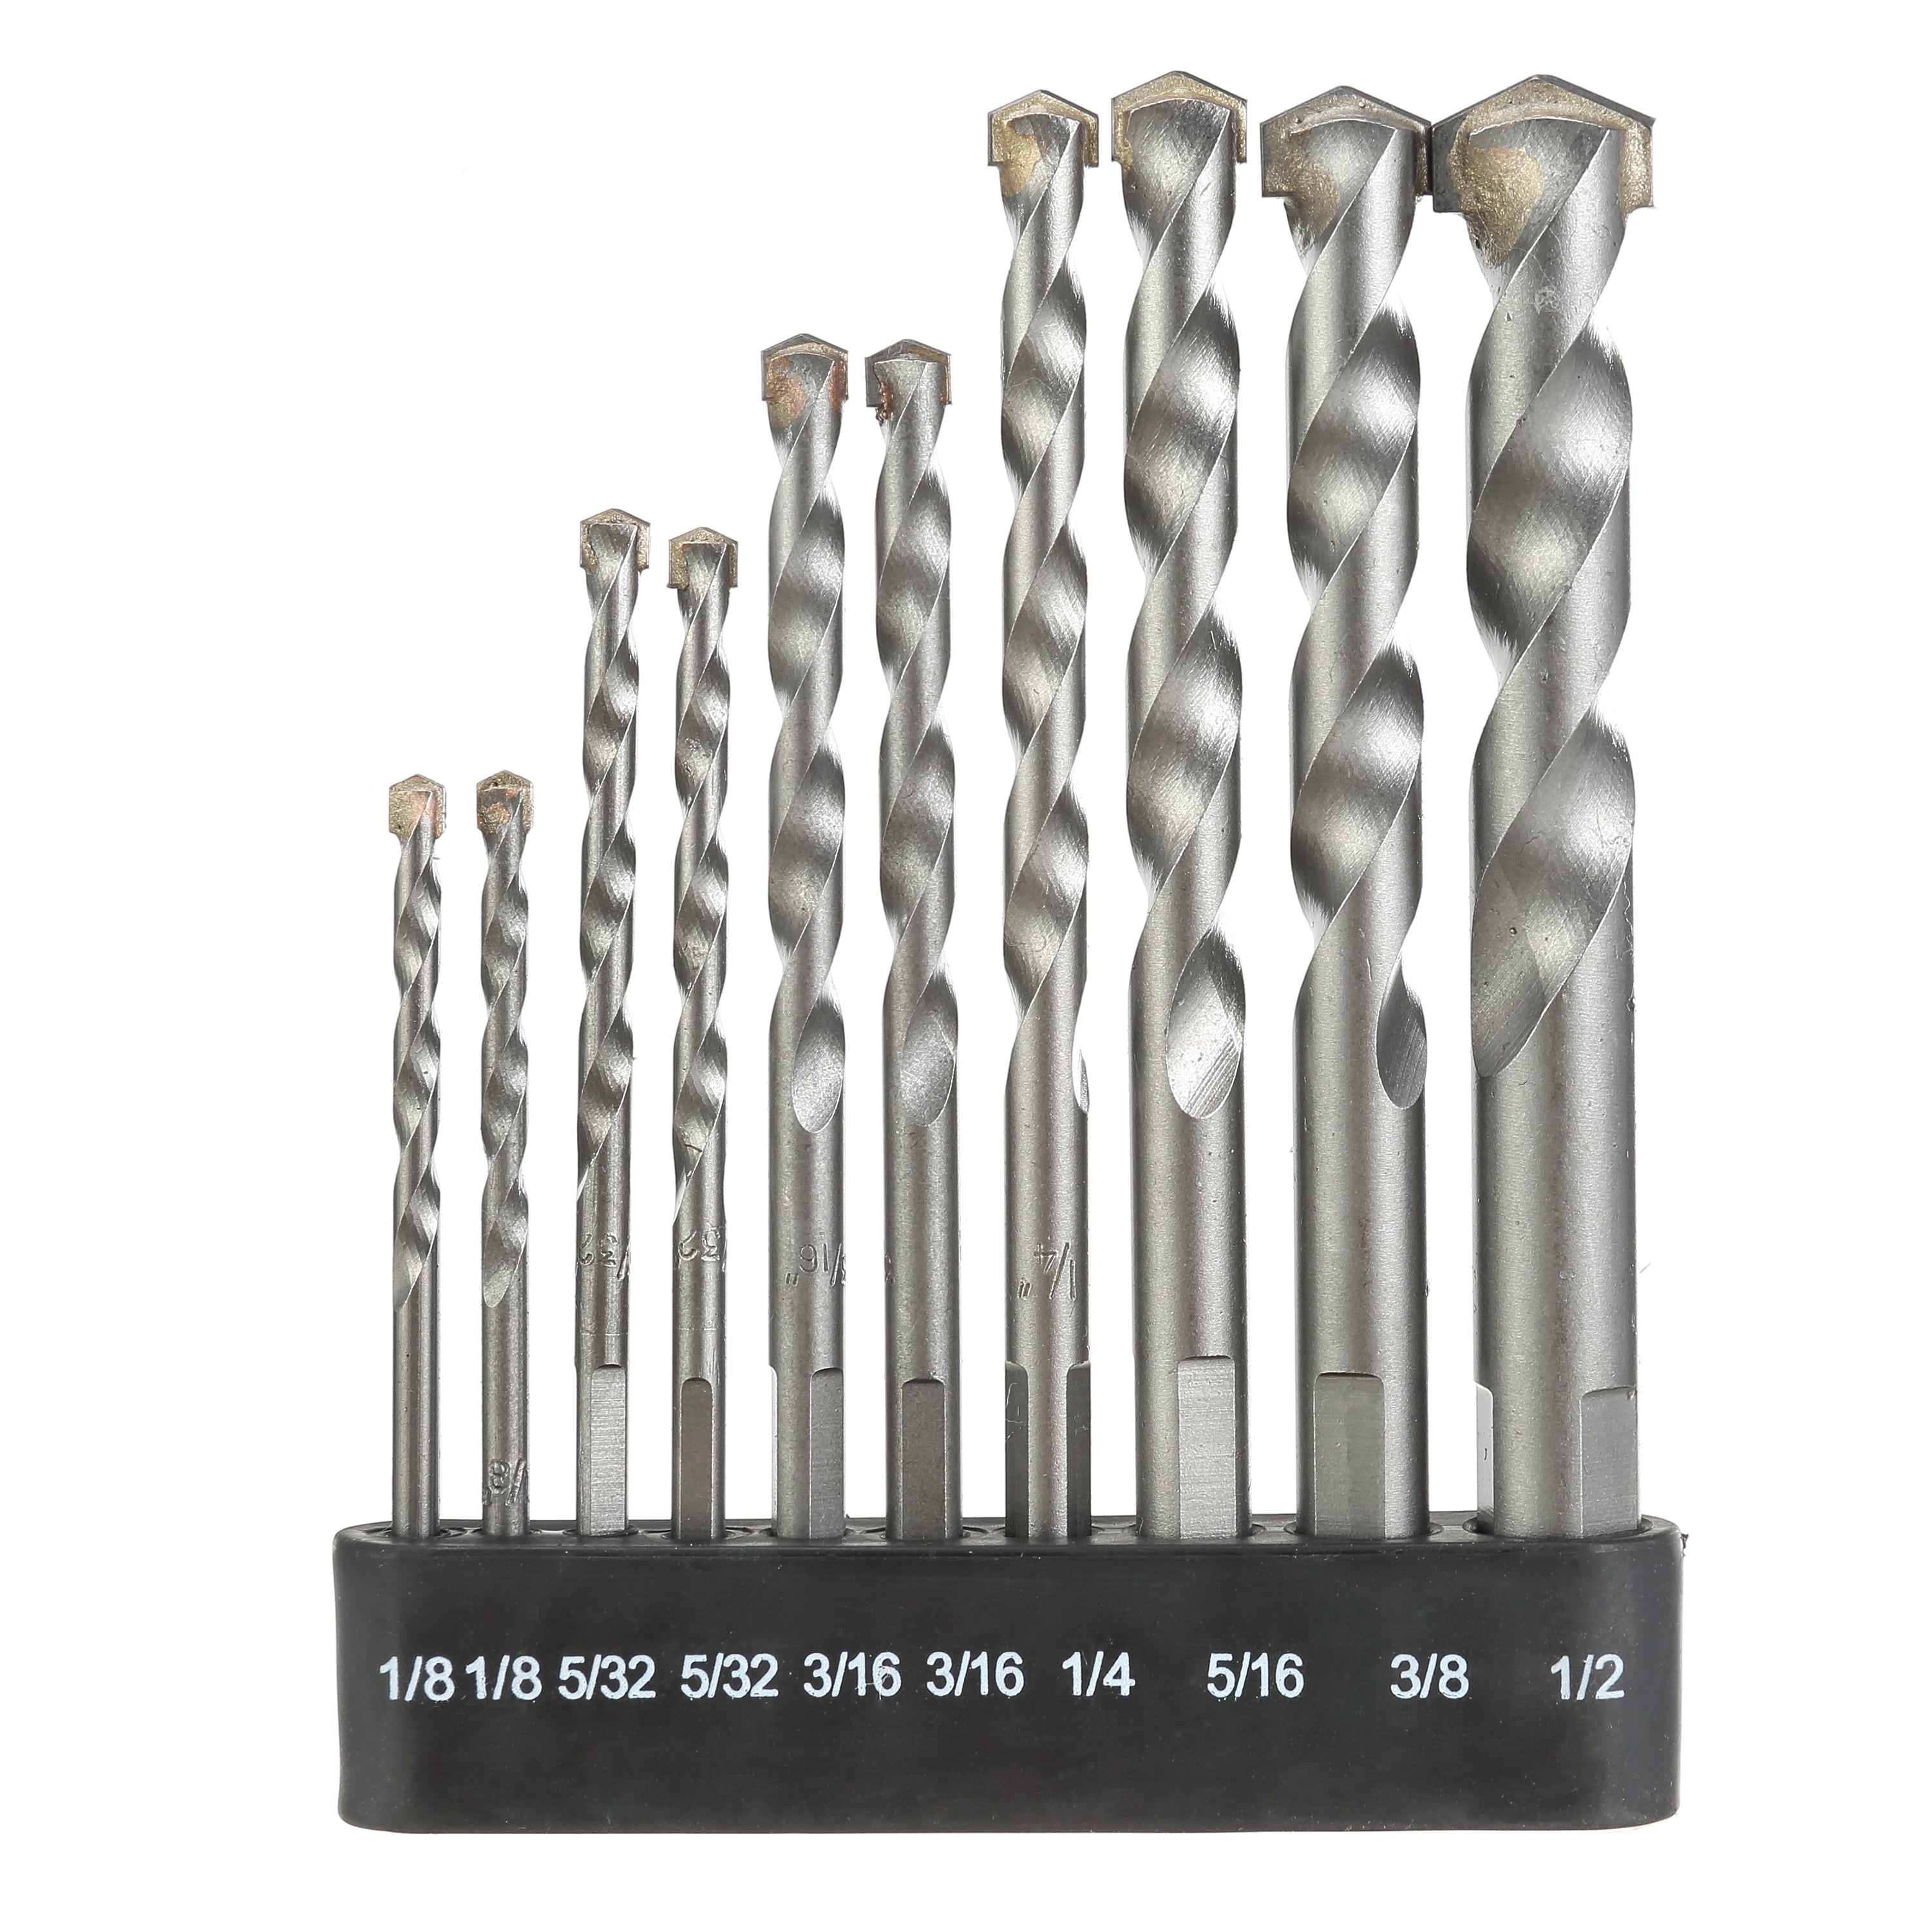 uxcell PCB Drill Bits 3.65mm Tungsten Carbide Spiral Flute Jewelry CNC Engraving Print Circuit Board Micro Drill Bits 1/8 Shank 